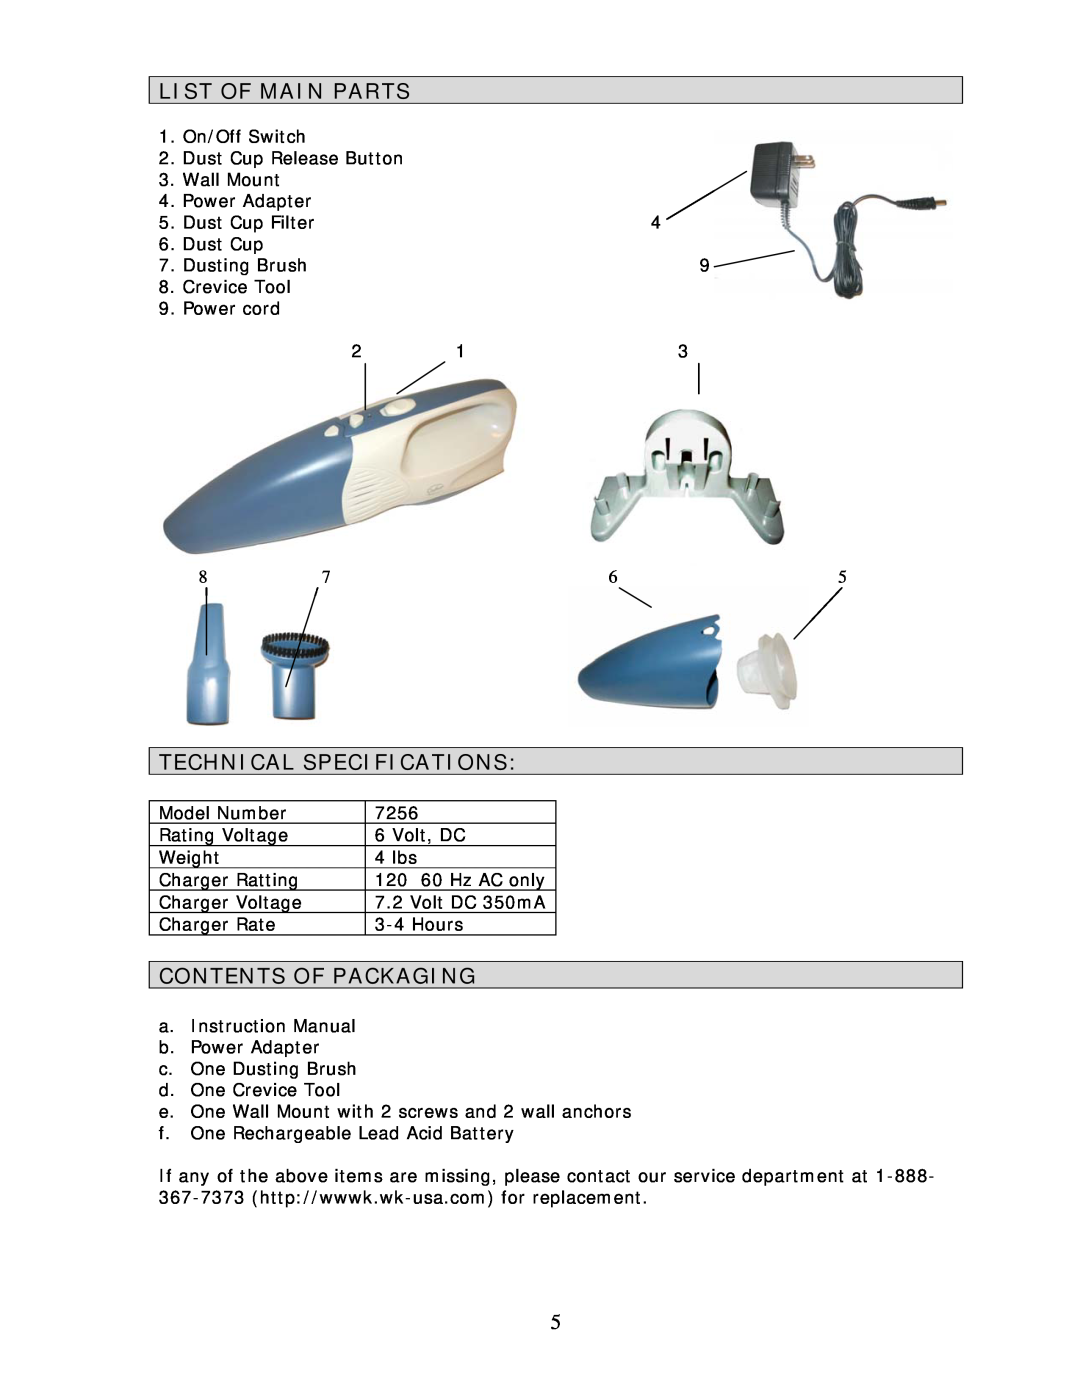 Wachsmuth & Krogmann Item# 7256 manual List Of Main Parts, Technical Specifications, Contents Of Packaging 